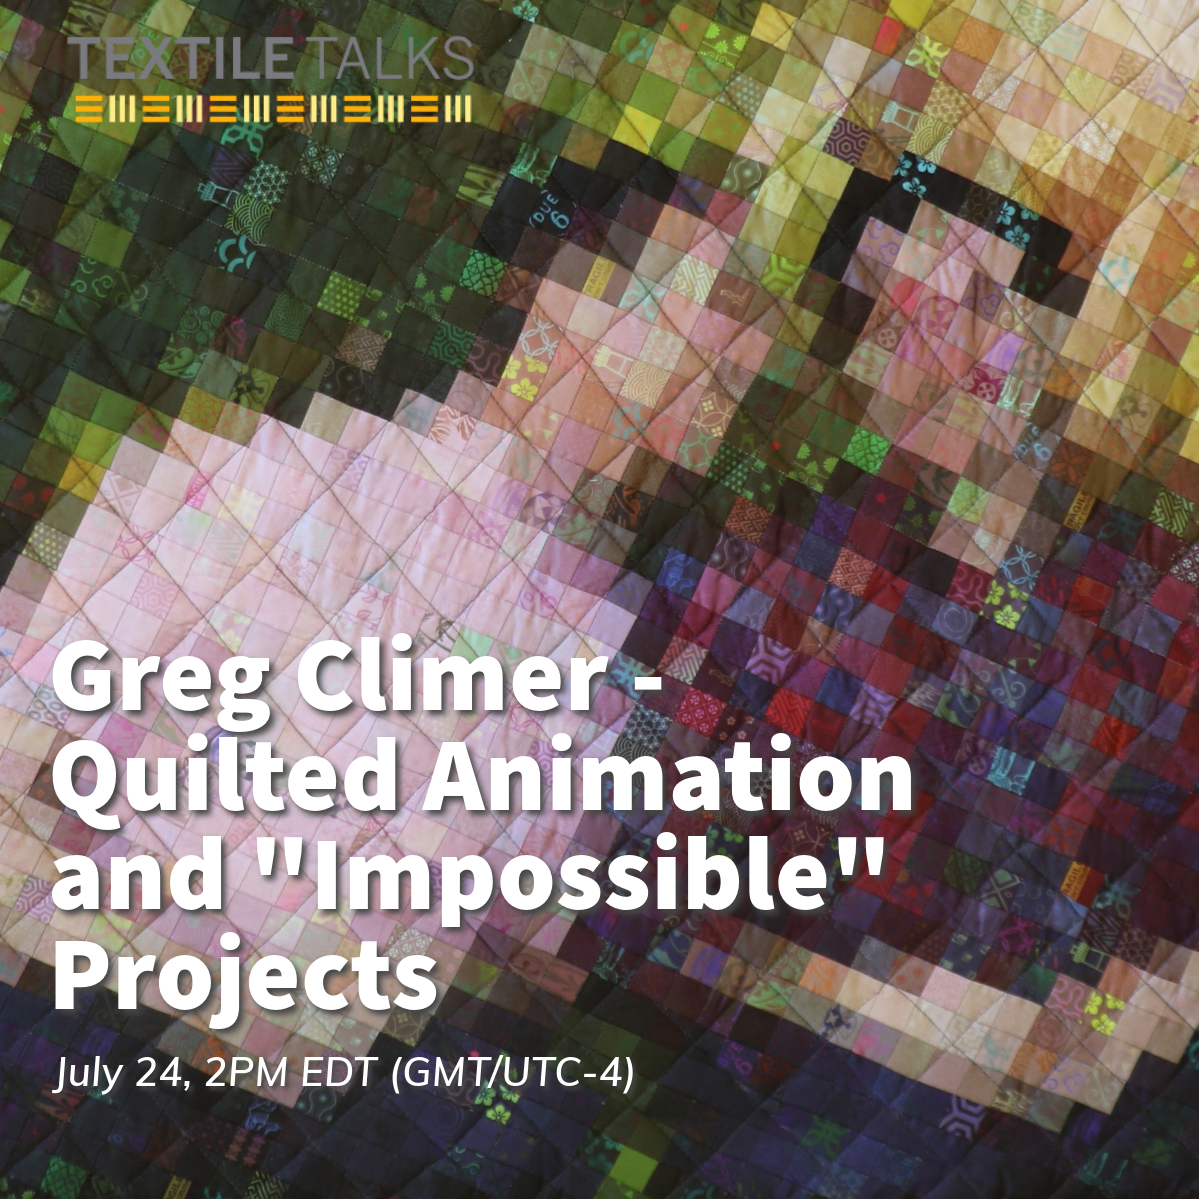  Greg Climer - Quilted Animation and "Impossible" Projects, presented by SAQA